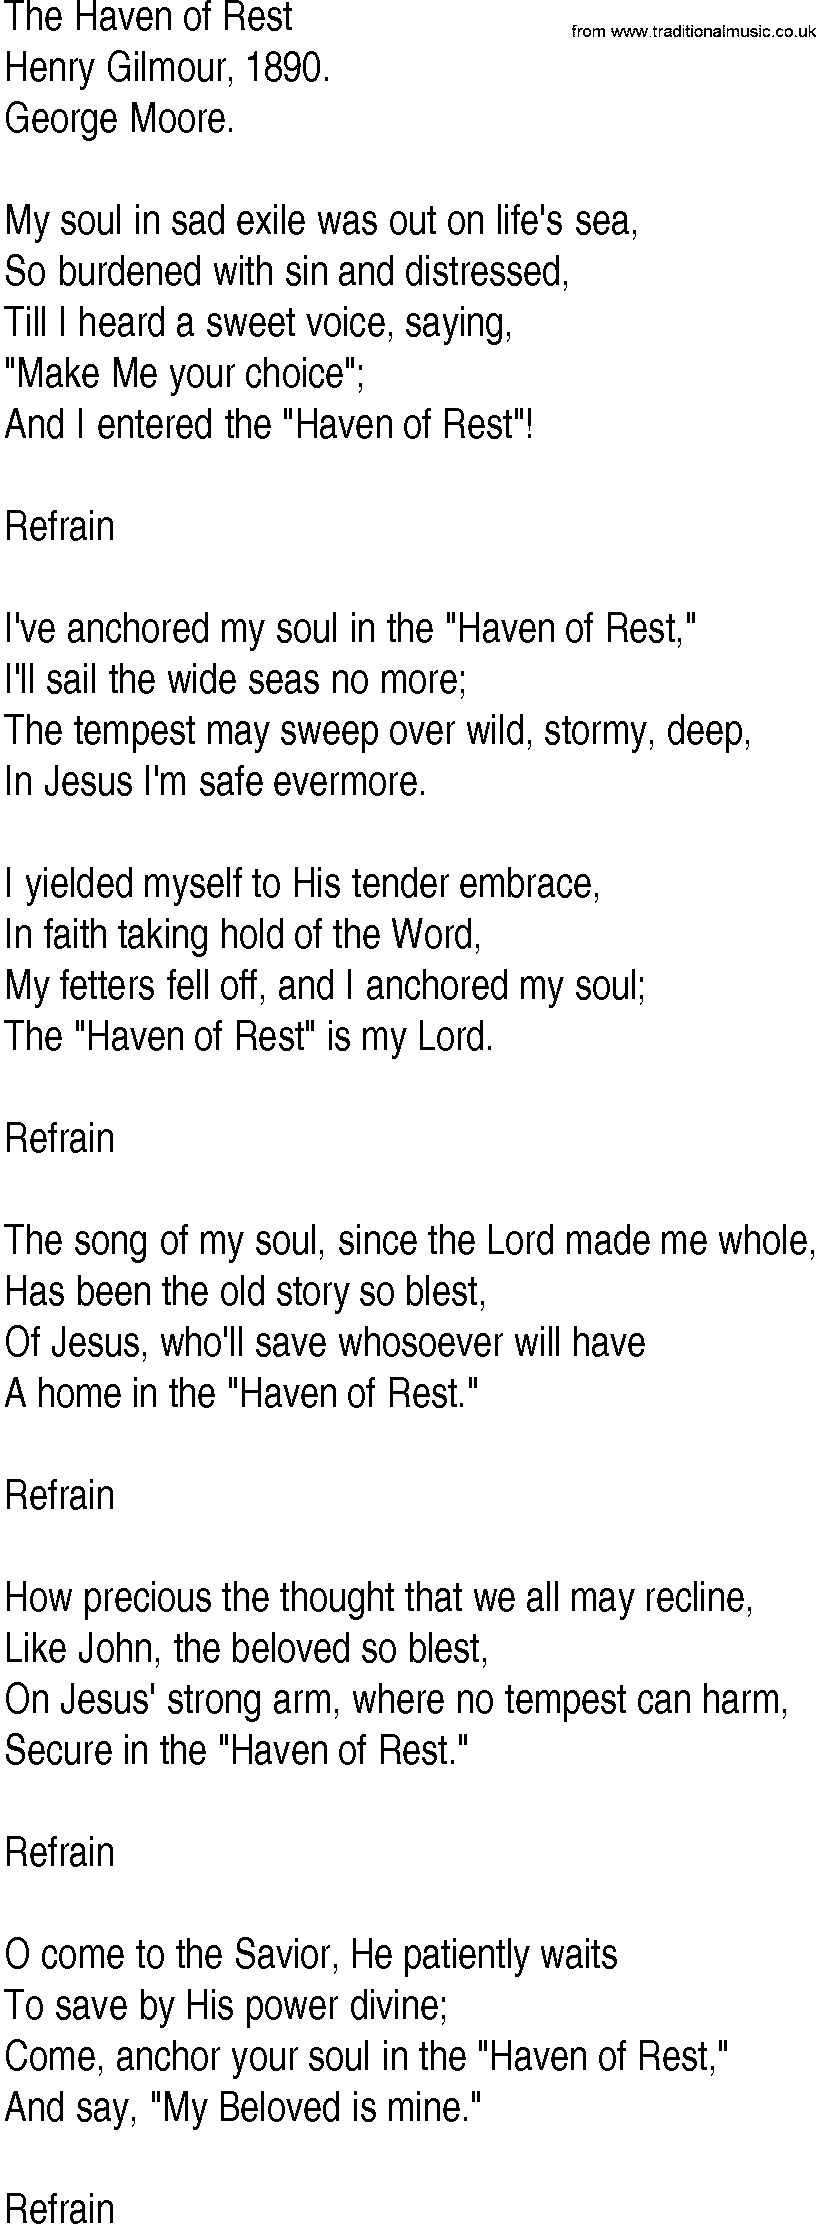 Hymn and Gospel Song: The Haven of Rest by Henry Gilmour lyrics